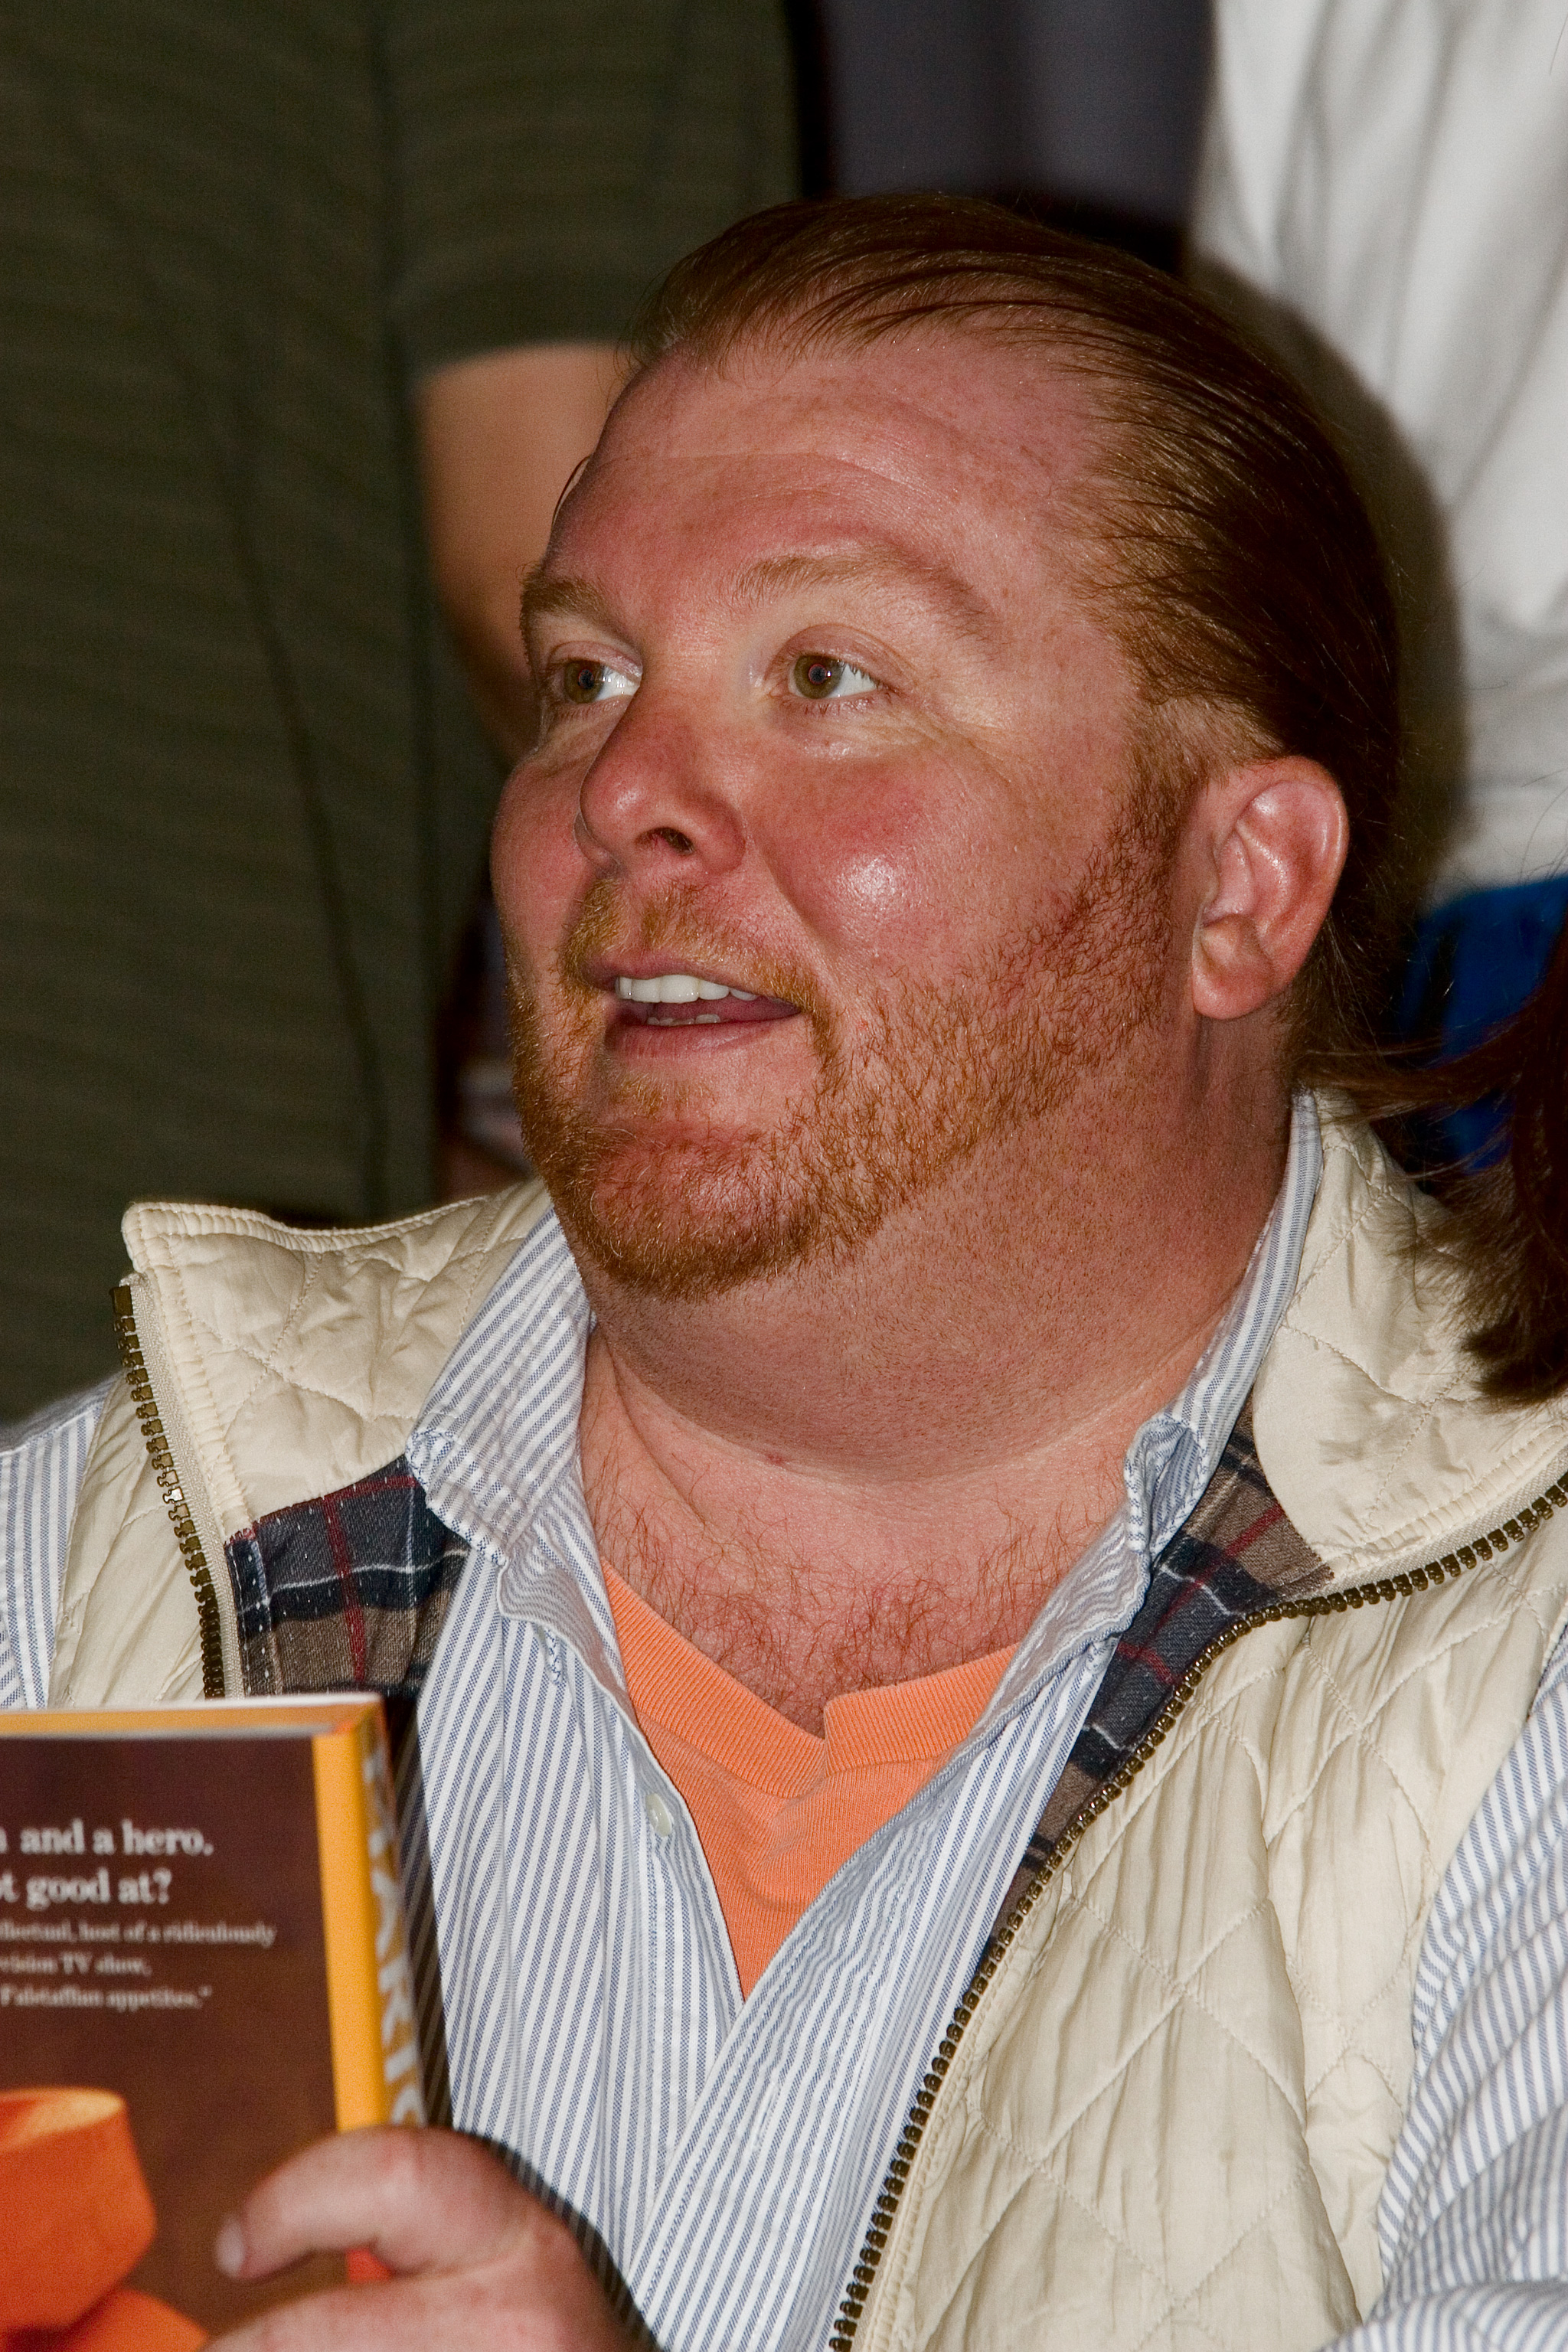 People News Roundup: Woman at trial says celebrity chef Mario Batali groped her at Boston bar